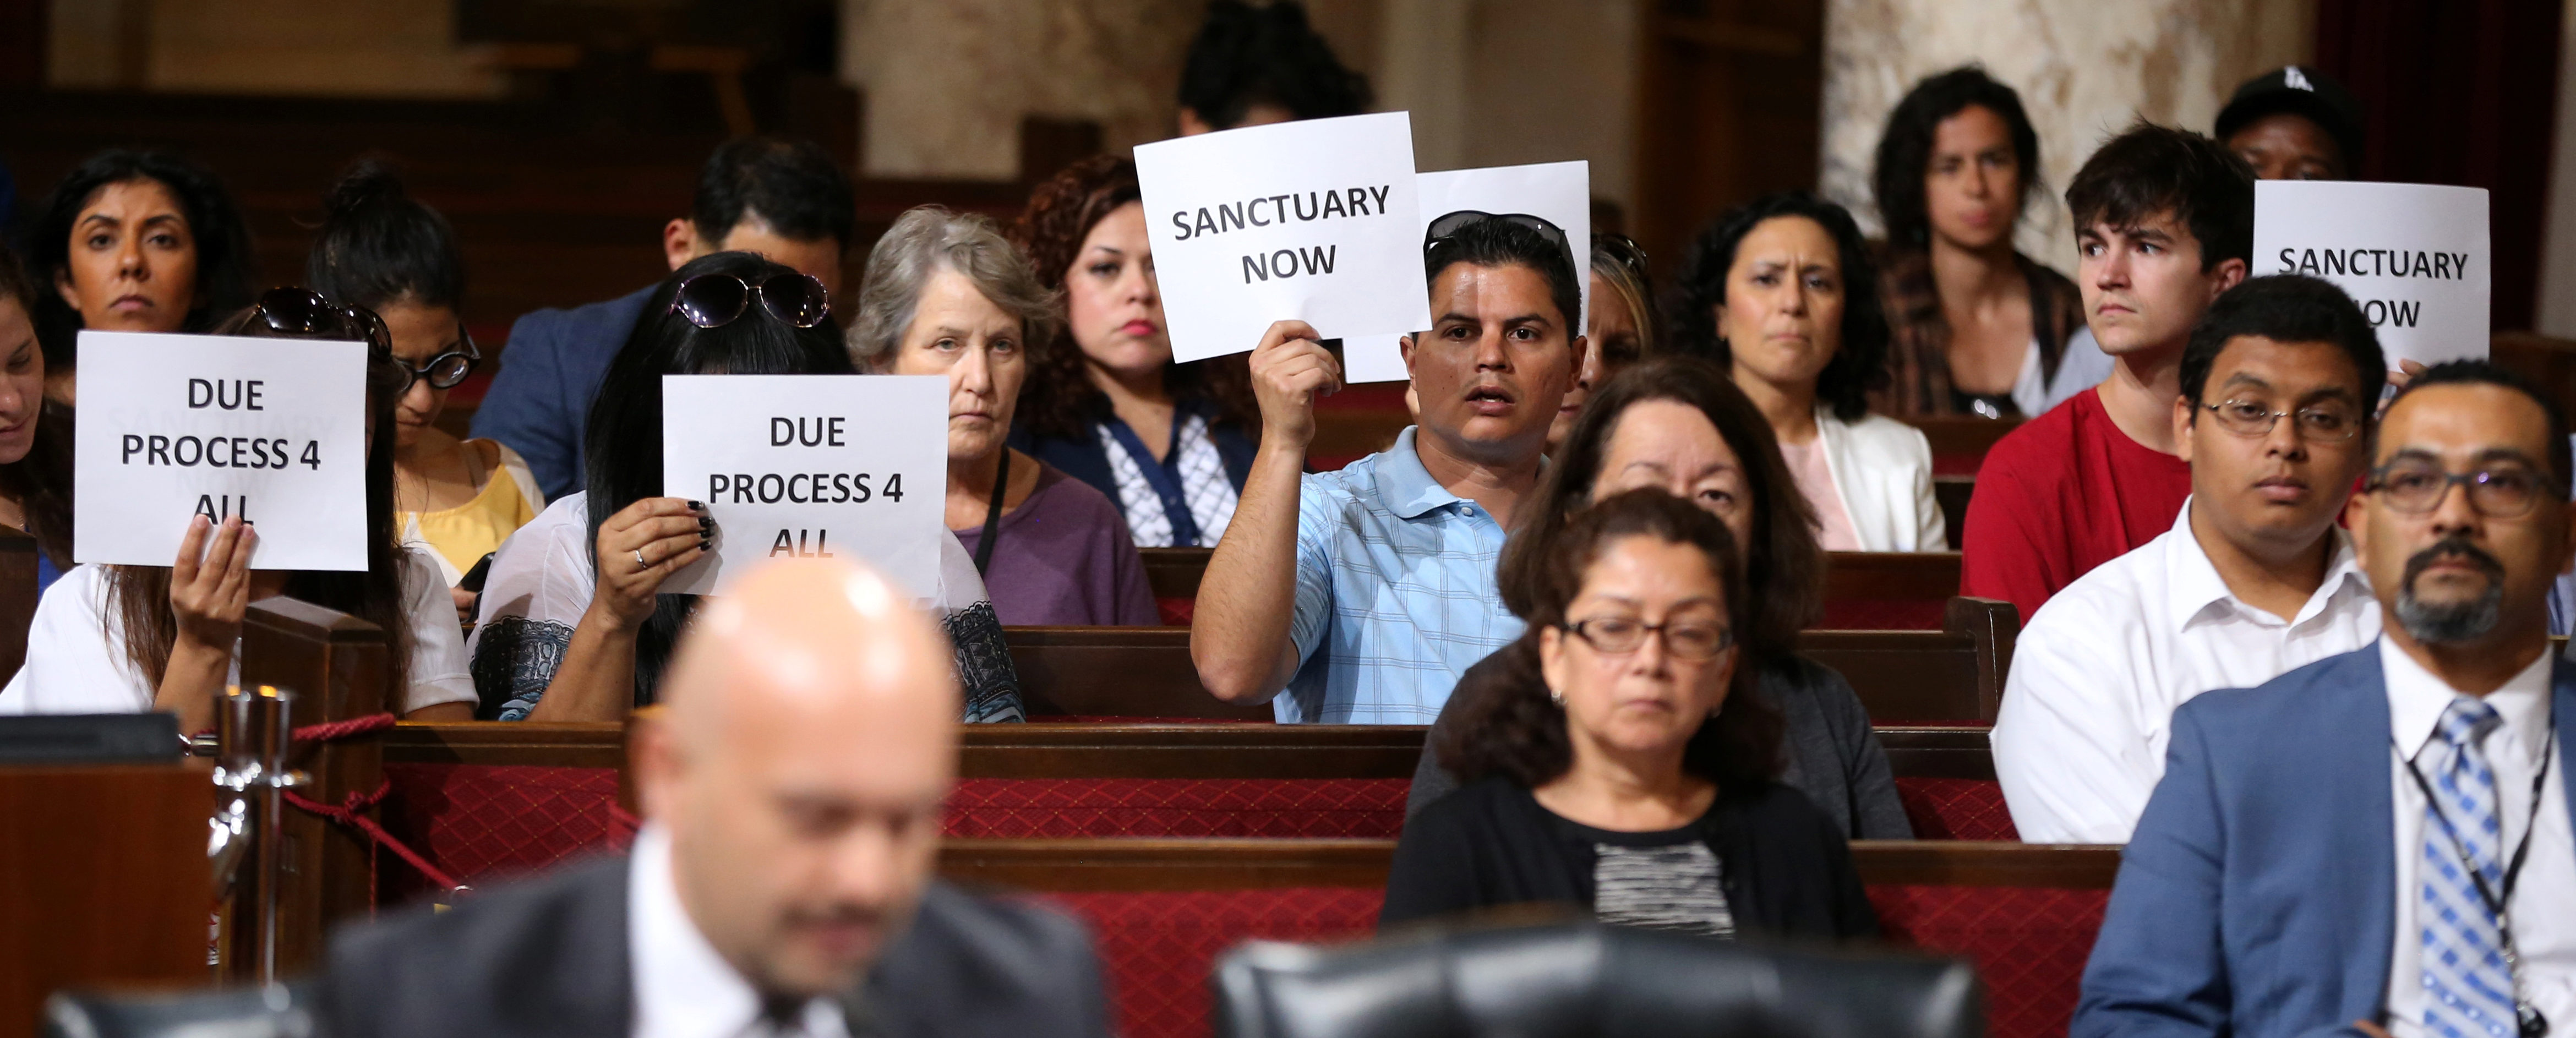 Immigrant supporters protest during the Los Angeles City Council ad hoc committee on immigration meeting to discuss the city's response to threats by the Trump administration to cut funding from Los Angeles and other jurisdictions which federal officials say are providing sanctuary to illegal immigrants arrested for crimes, in Los Angeles, California, U.S., March 30, 2017. REUTERS/Lucy Nicholson